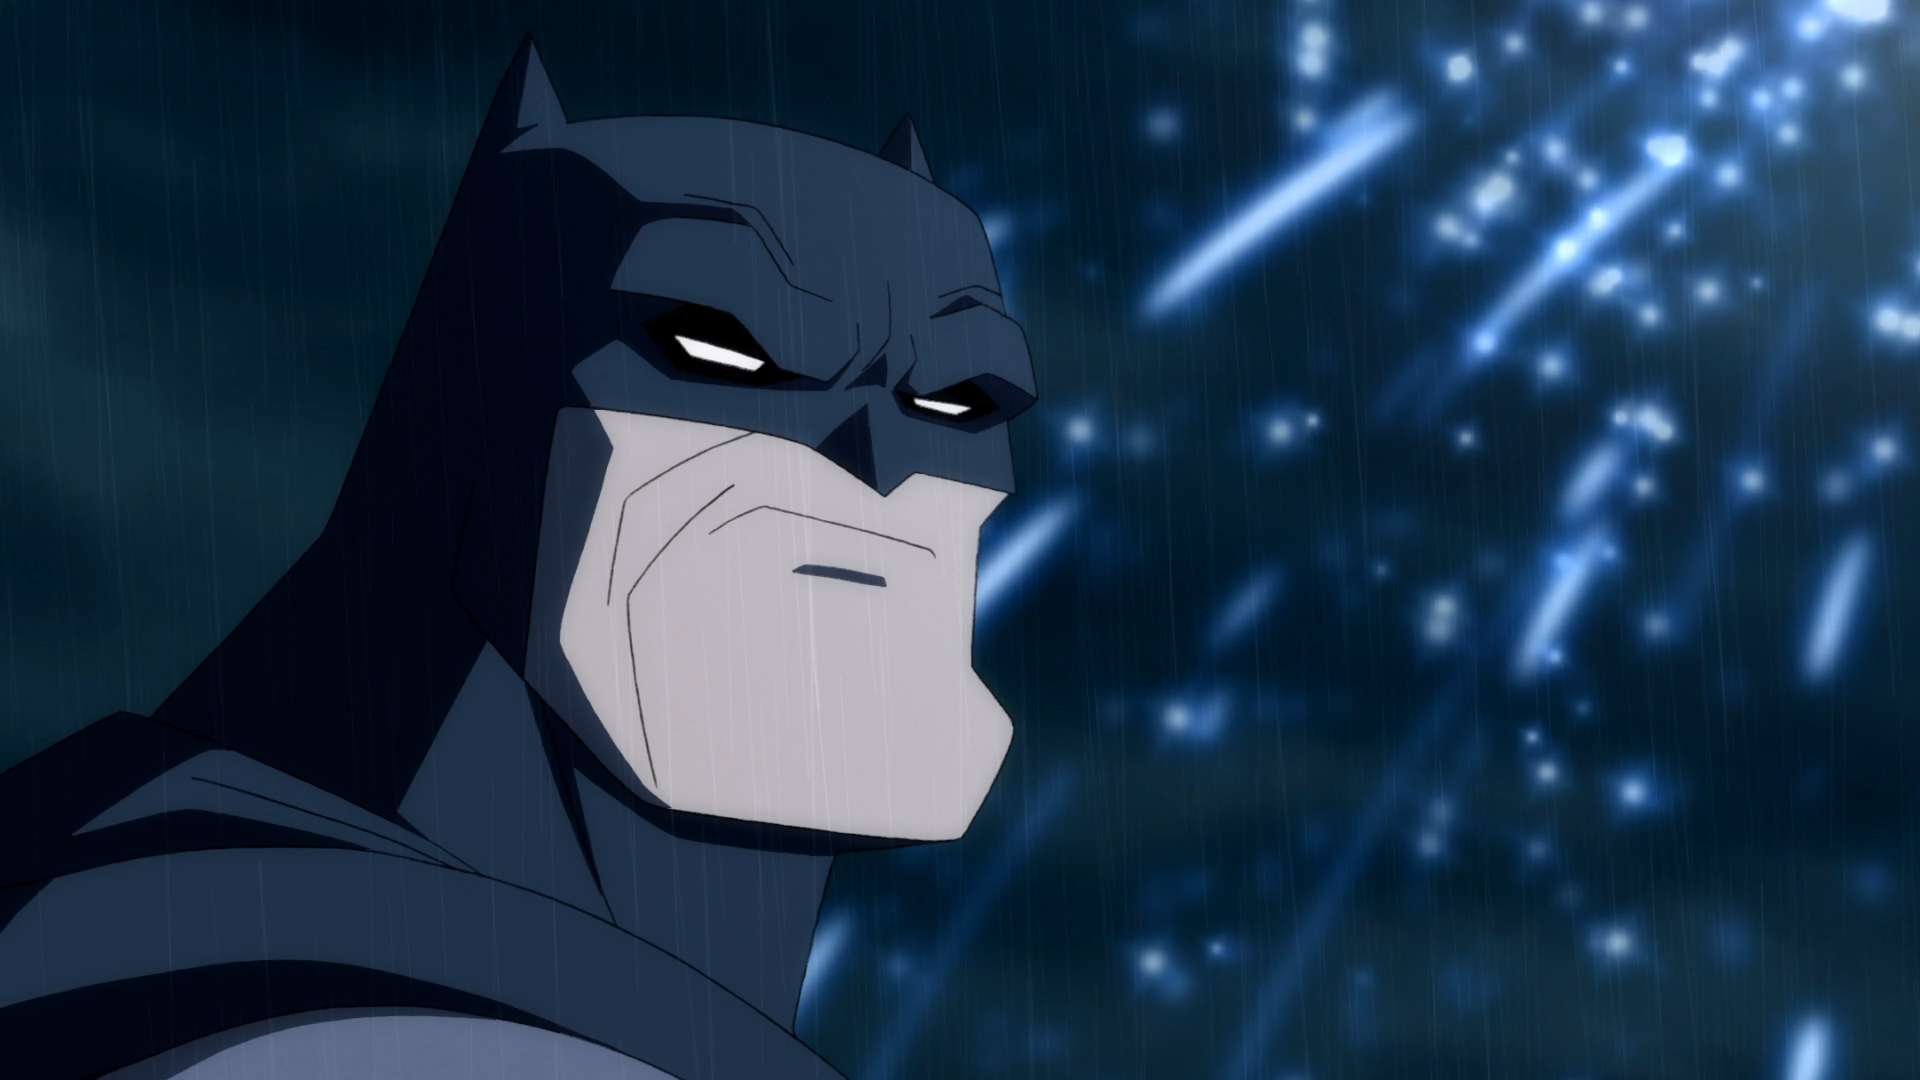 The Dark Knight Returns proves that comic book stories can work on the